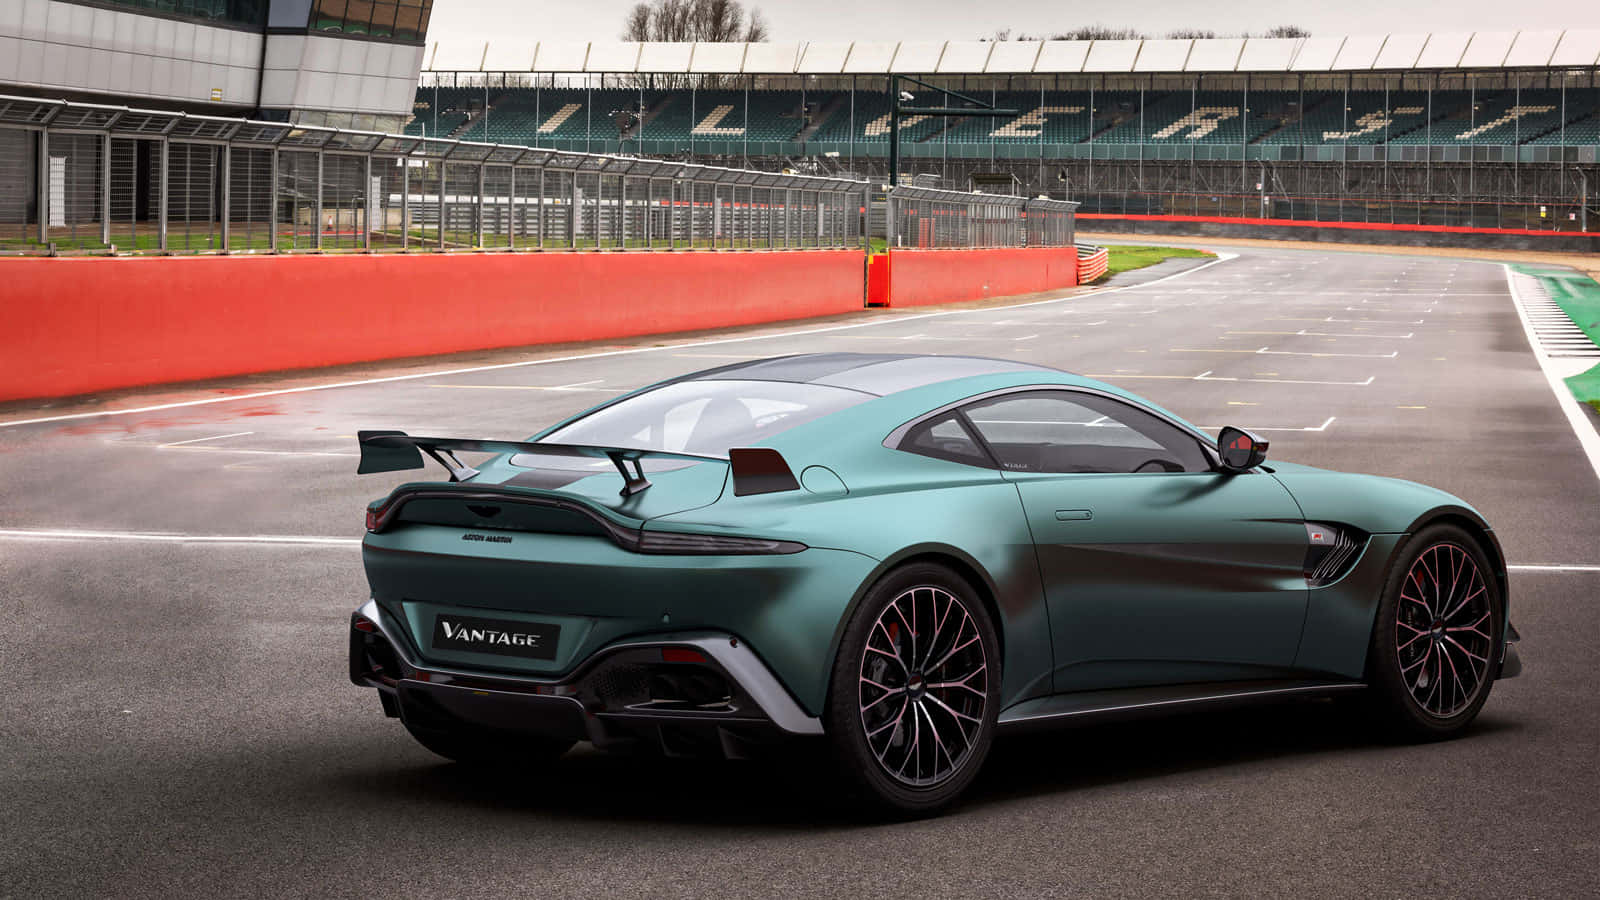 High-performance and luxury with an Aston Martin